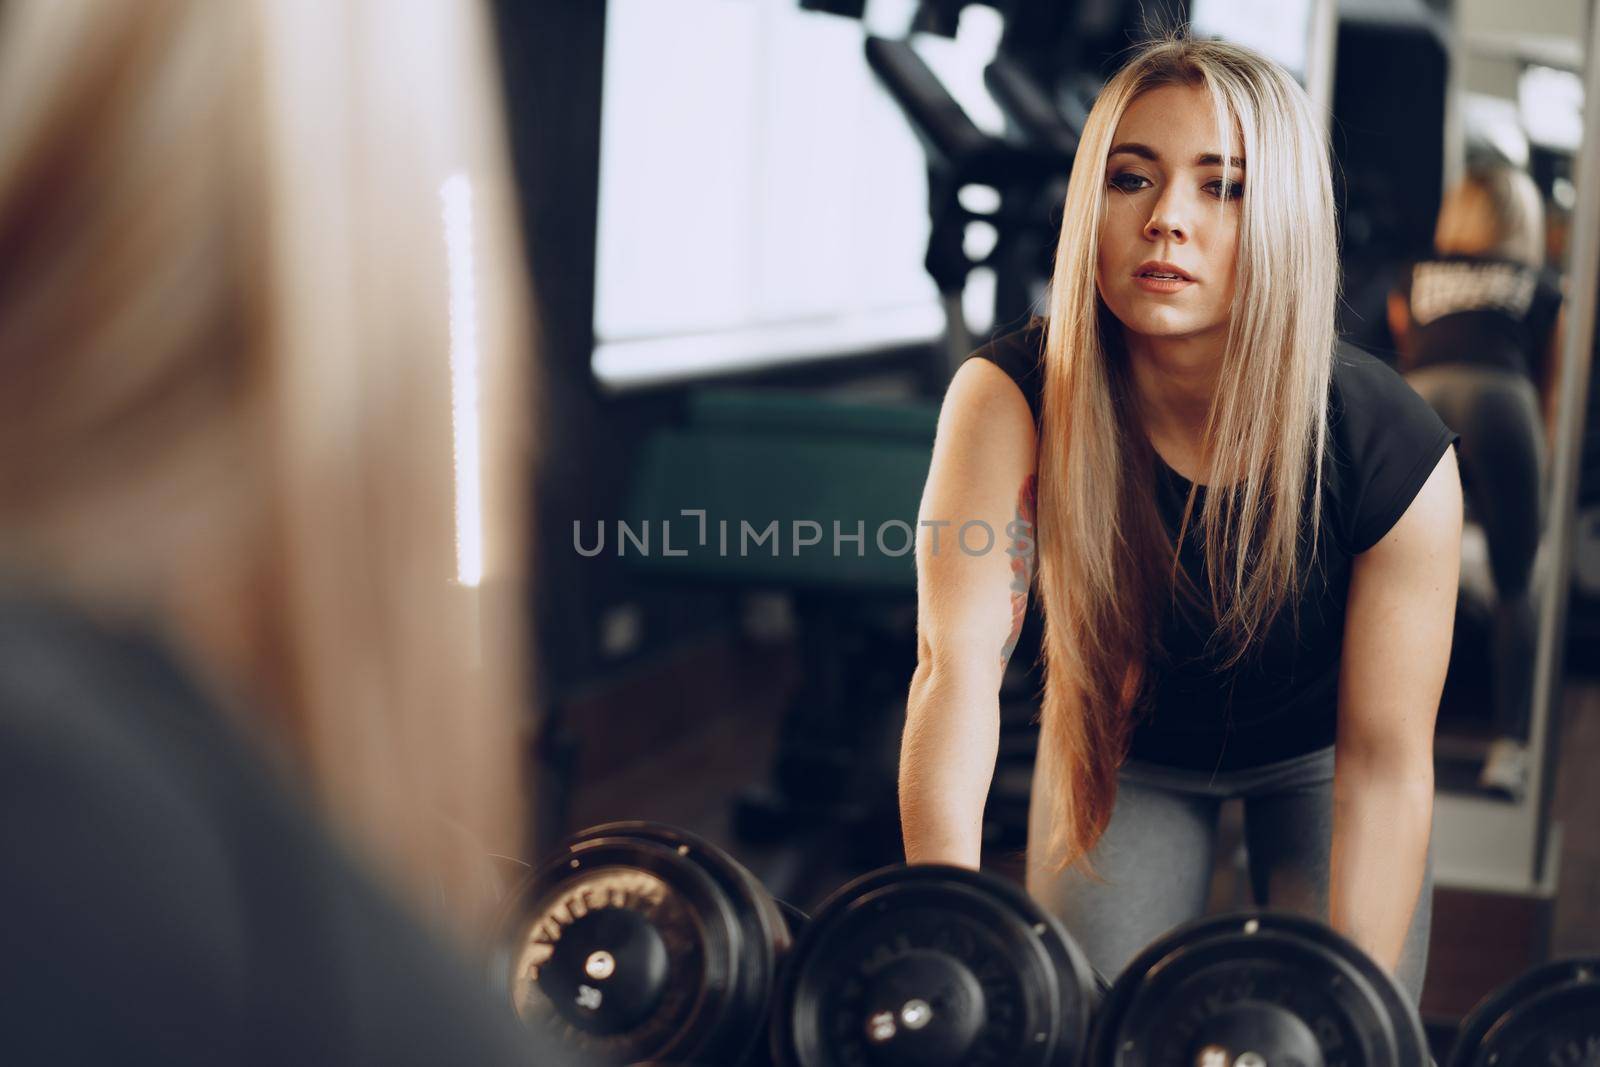 Back view of a young woman training her hands with a dumbbell in a gym